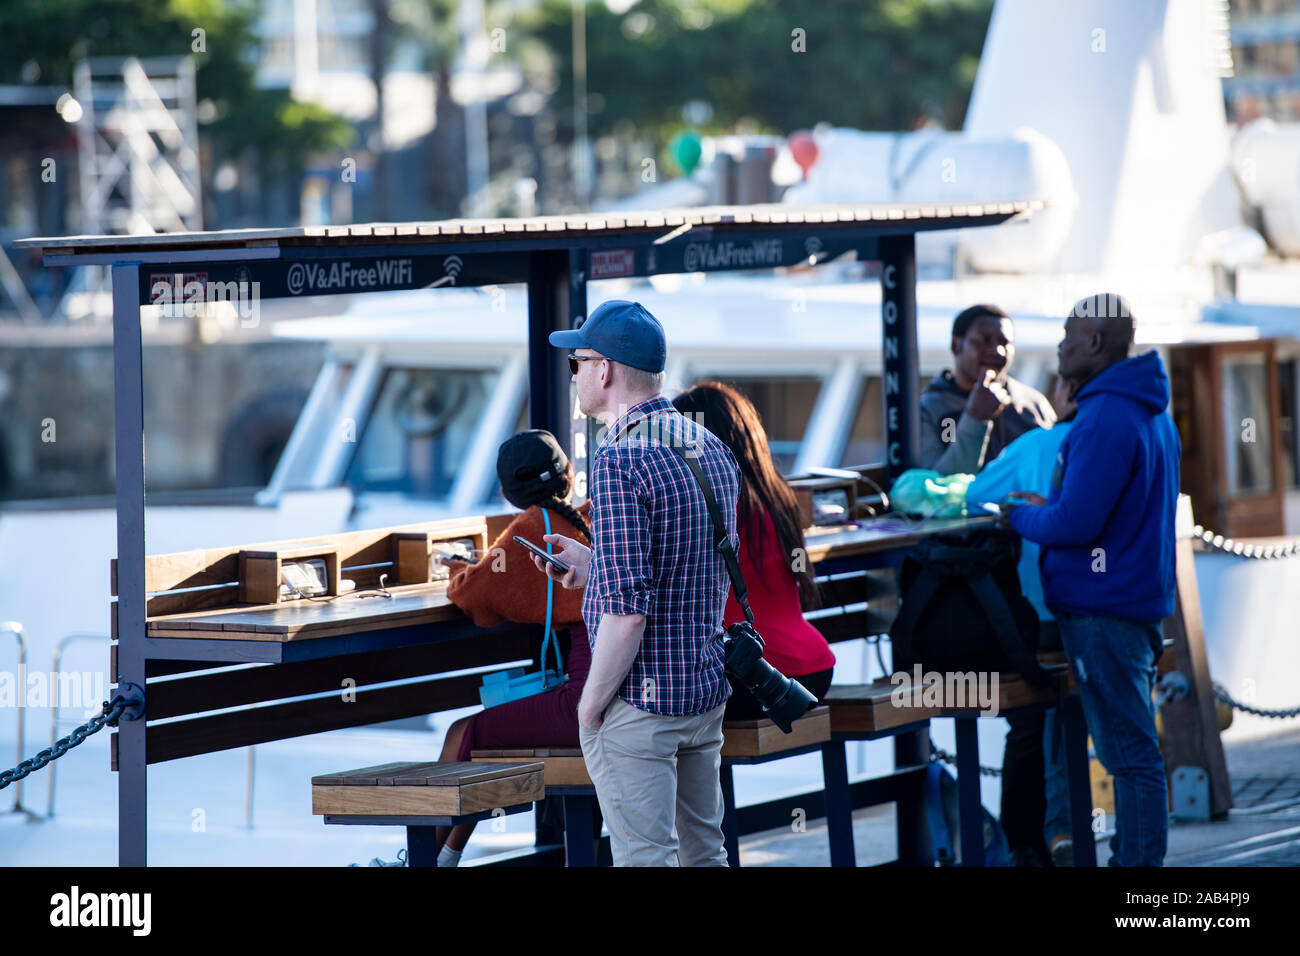 Waterfront near harbour with restaurants and shops. Capetown, South Africa. Stock Photo